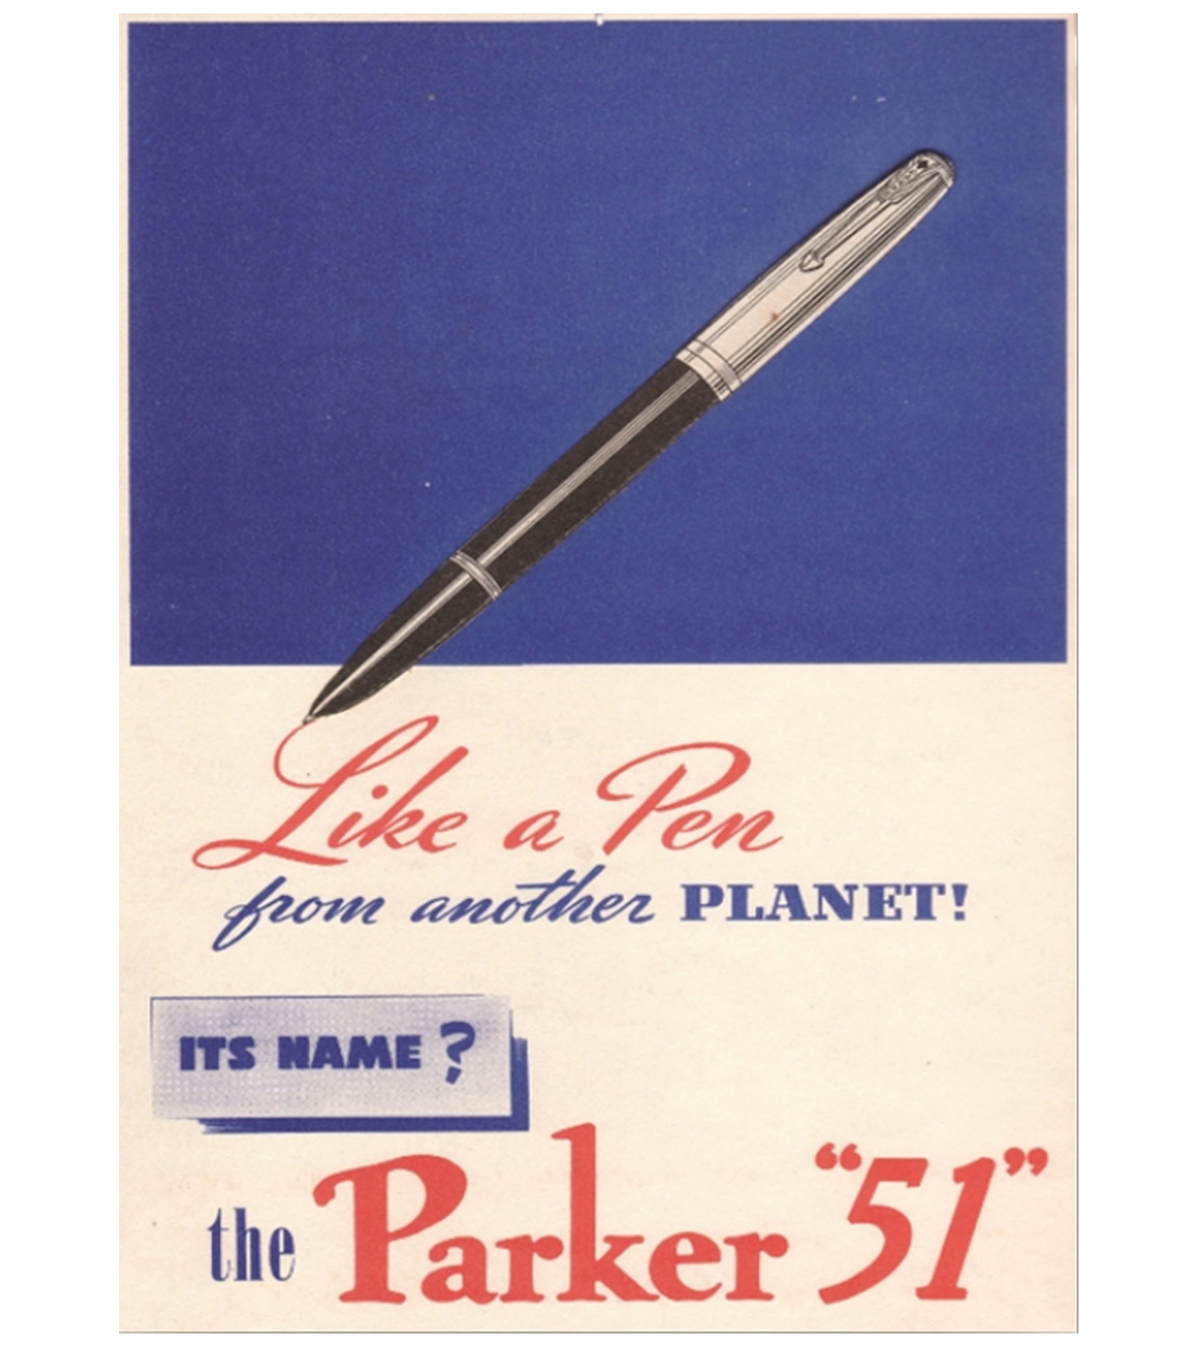 A vintage advertisement for a Parker 51 with slogan "Like a pen from another planet."